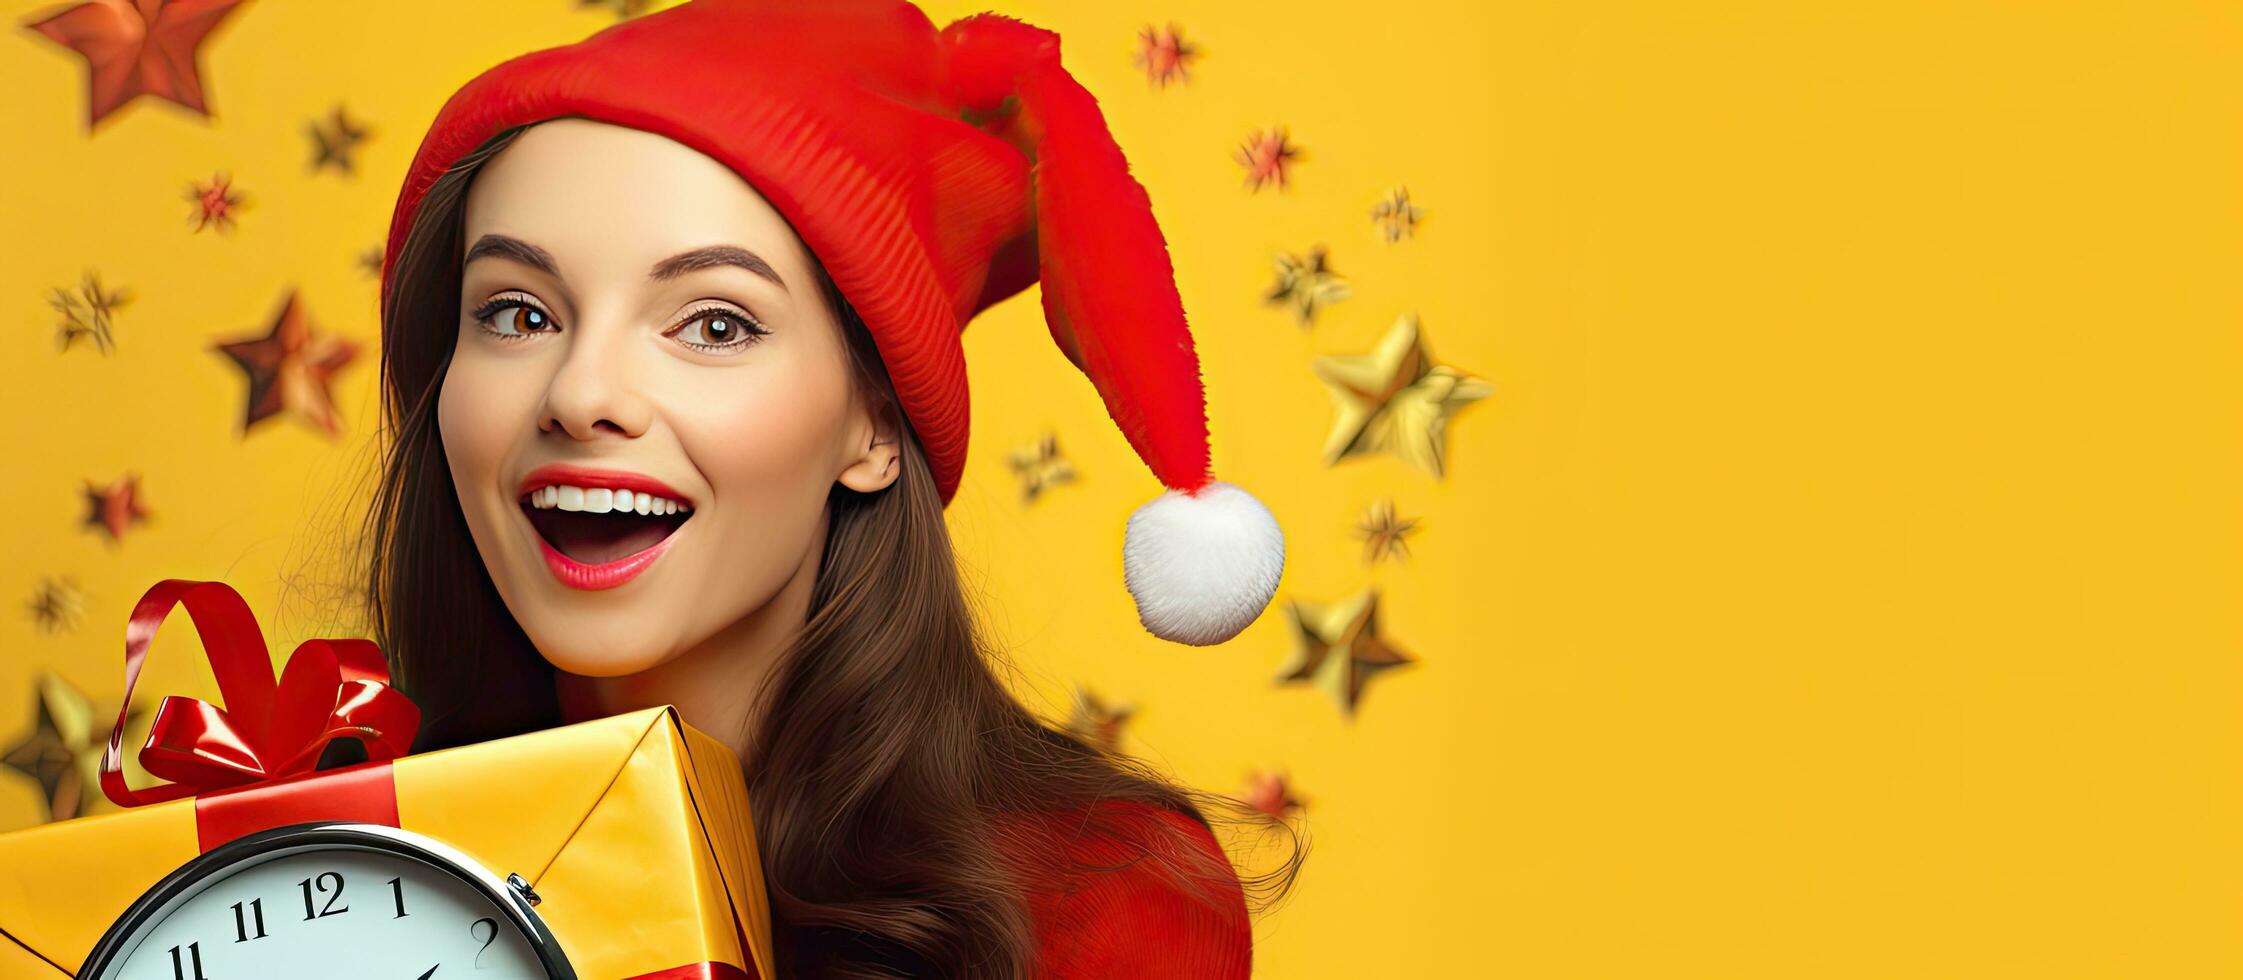 Smiling girl with box on yellow background banner with copy space Seasonal sales Boxing Day presents and gifts purchase photo